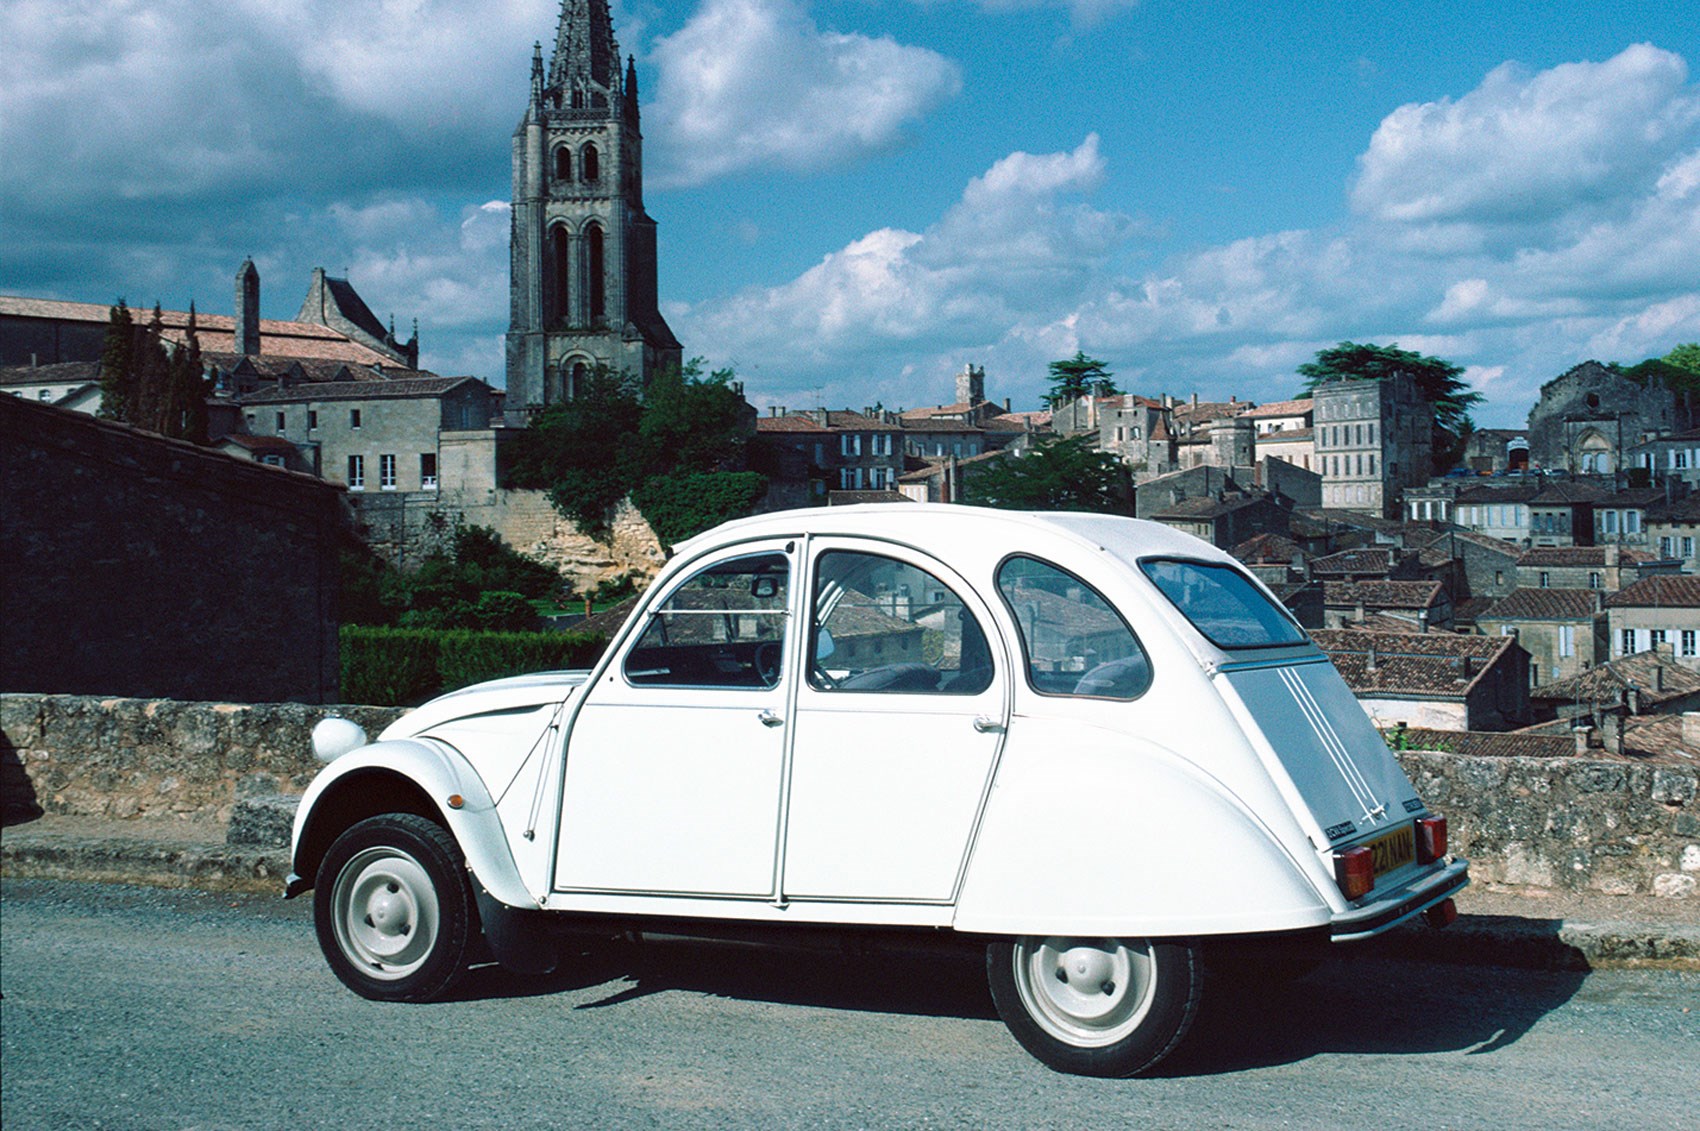 insuring a french registered car in the uk